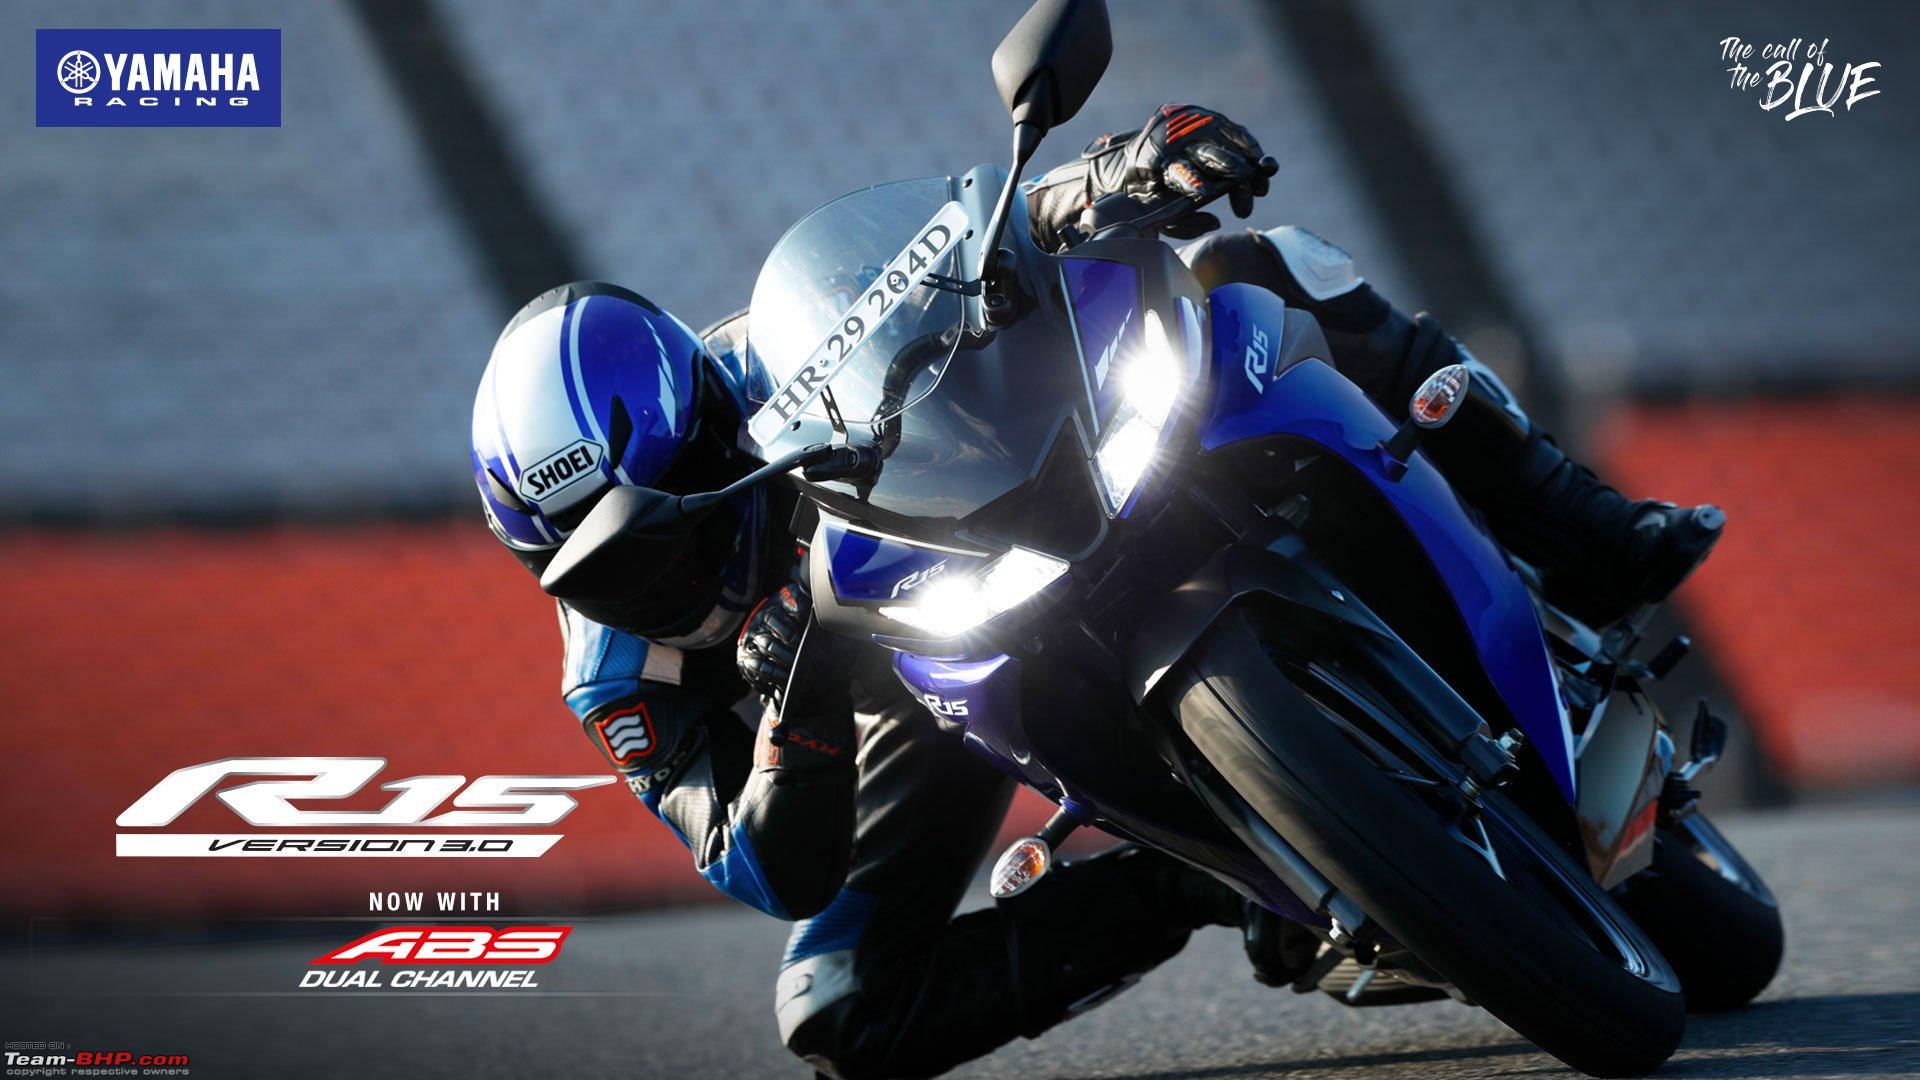 R15V3 Racing Blue Images / It comes in three different color variations ...